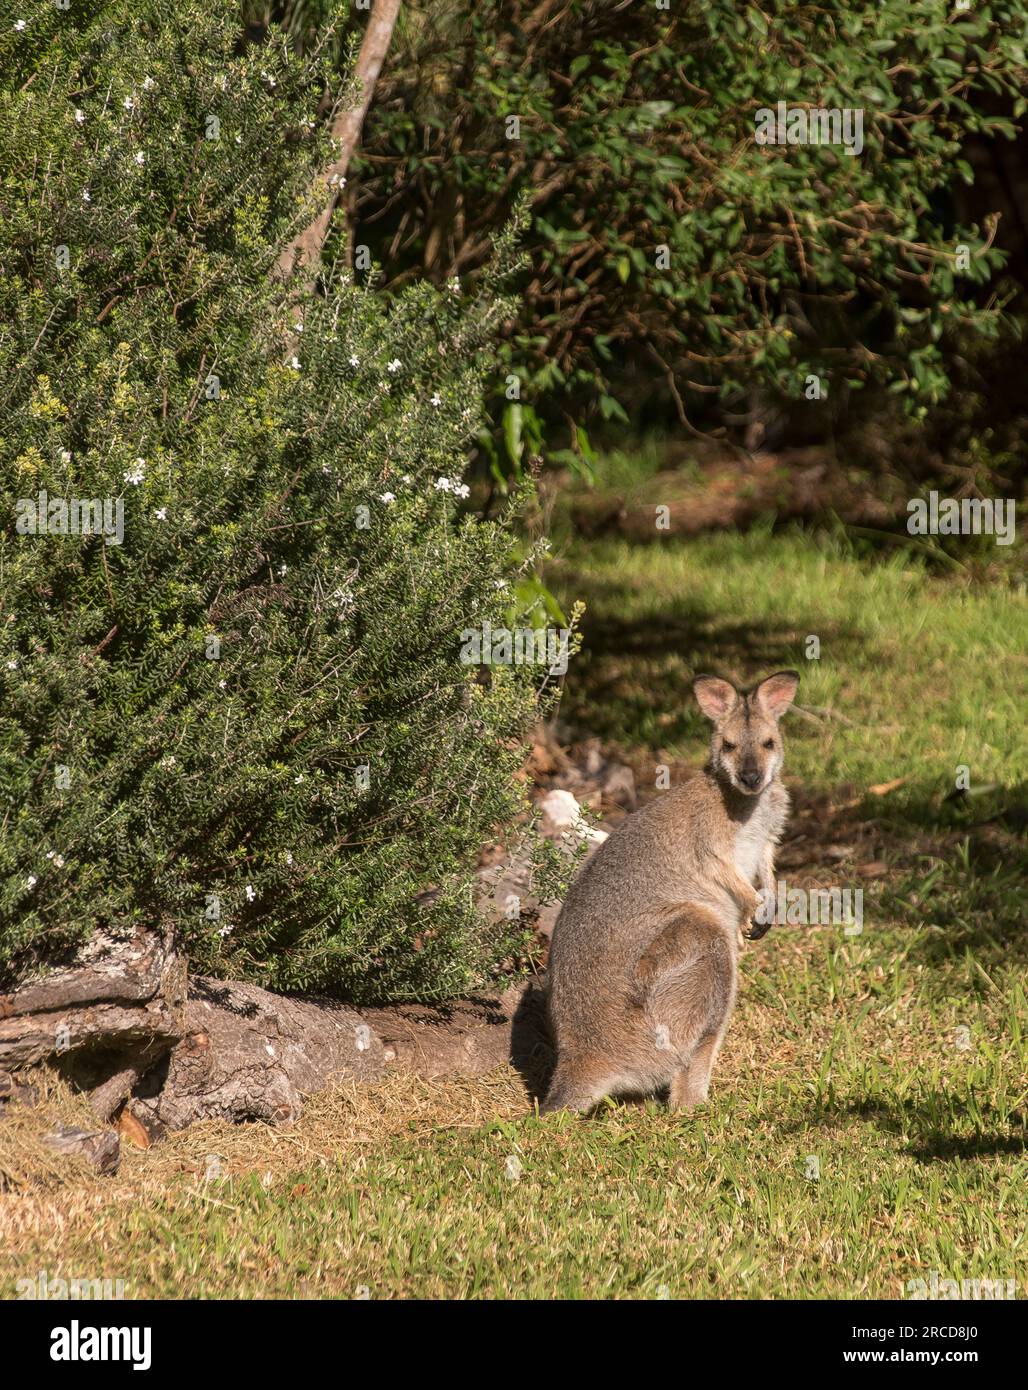 Young, wild red-necked wallaby, Macropus rufogriseus, in private Australian garden, next to Westringia shrub with tiny white flowers. Watching. Stock Photo